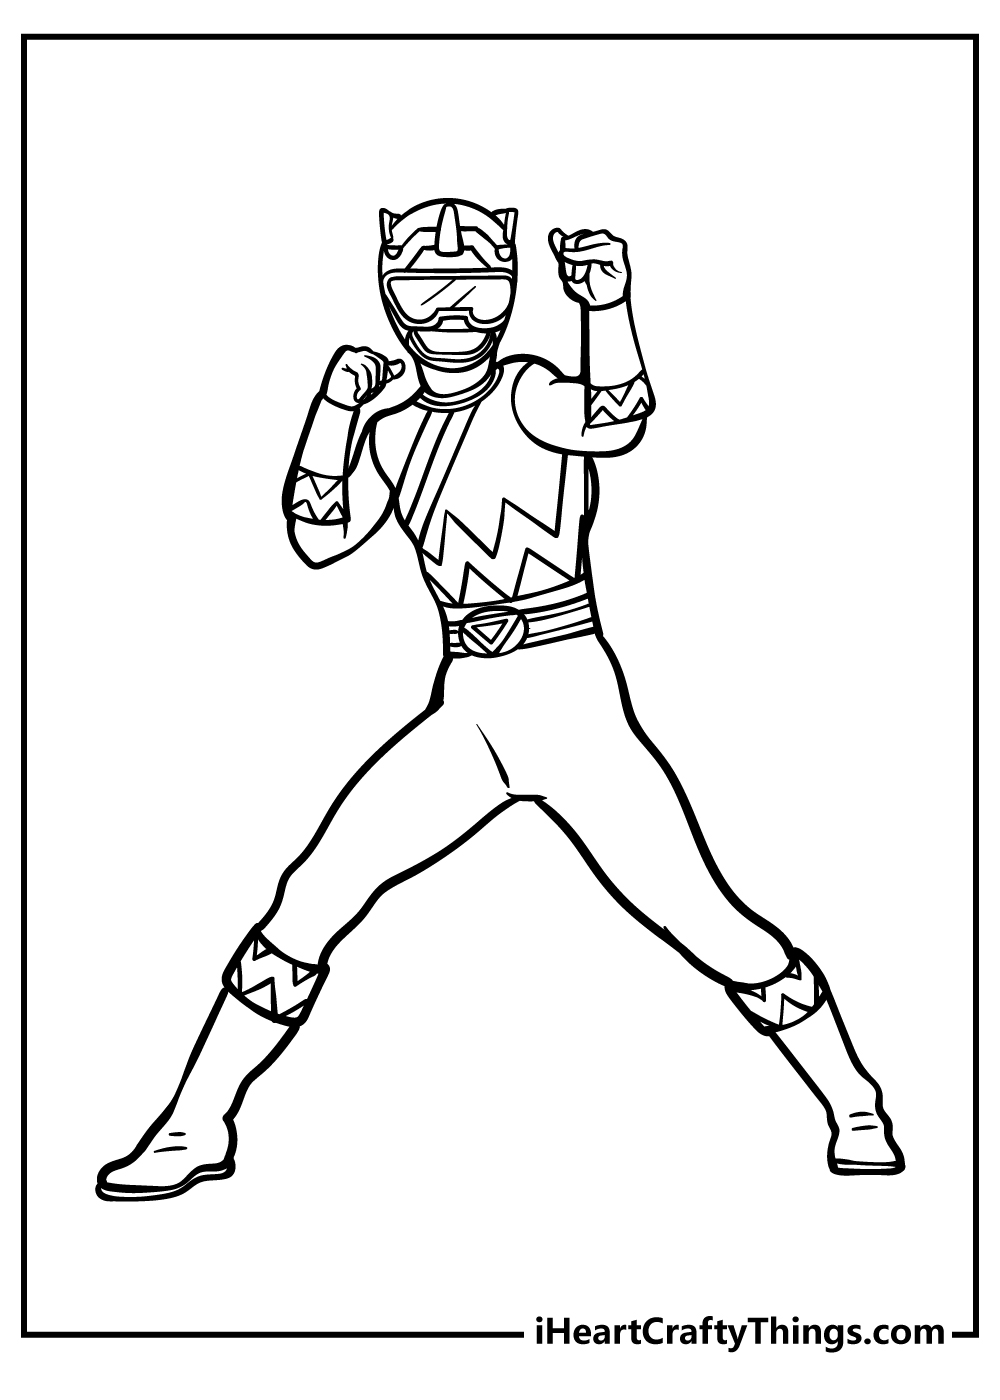 Power Rangers #50023 (Superheroes) – Free Printable Coloring Pages